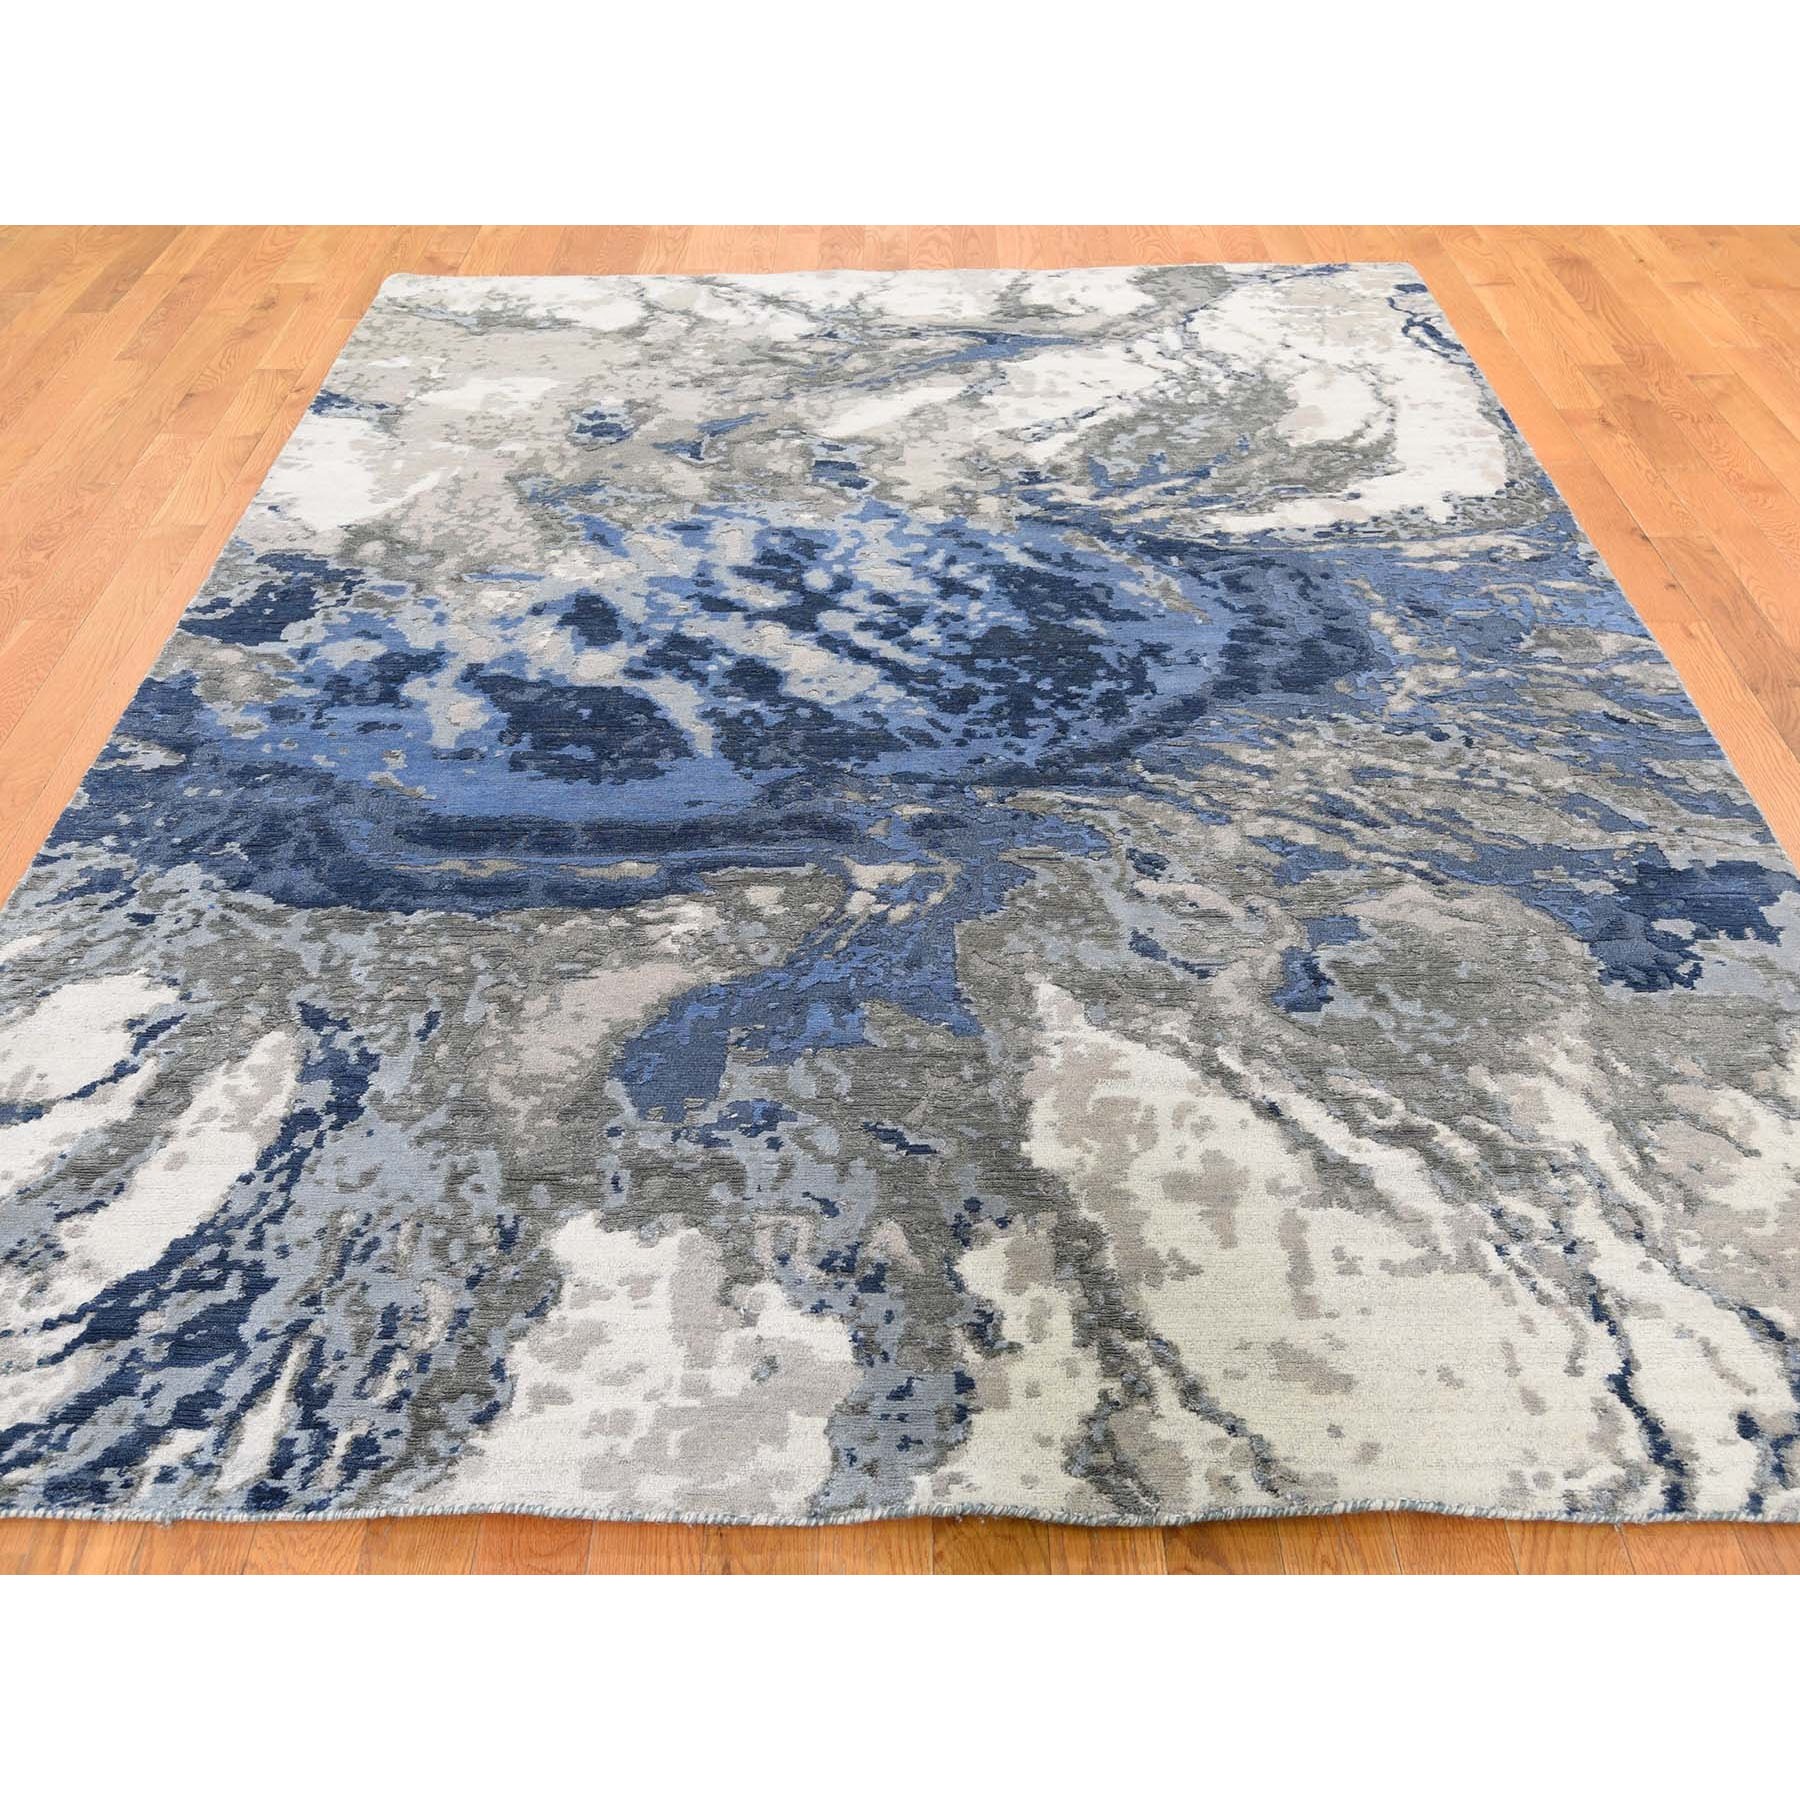 6-x9- Abstract Design Wool and Silk Hi-low Pile Hand Knotted Oriental Rug 